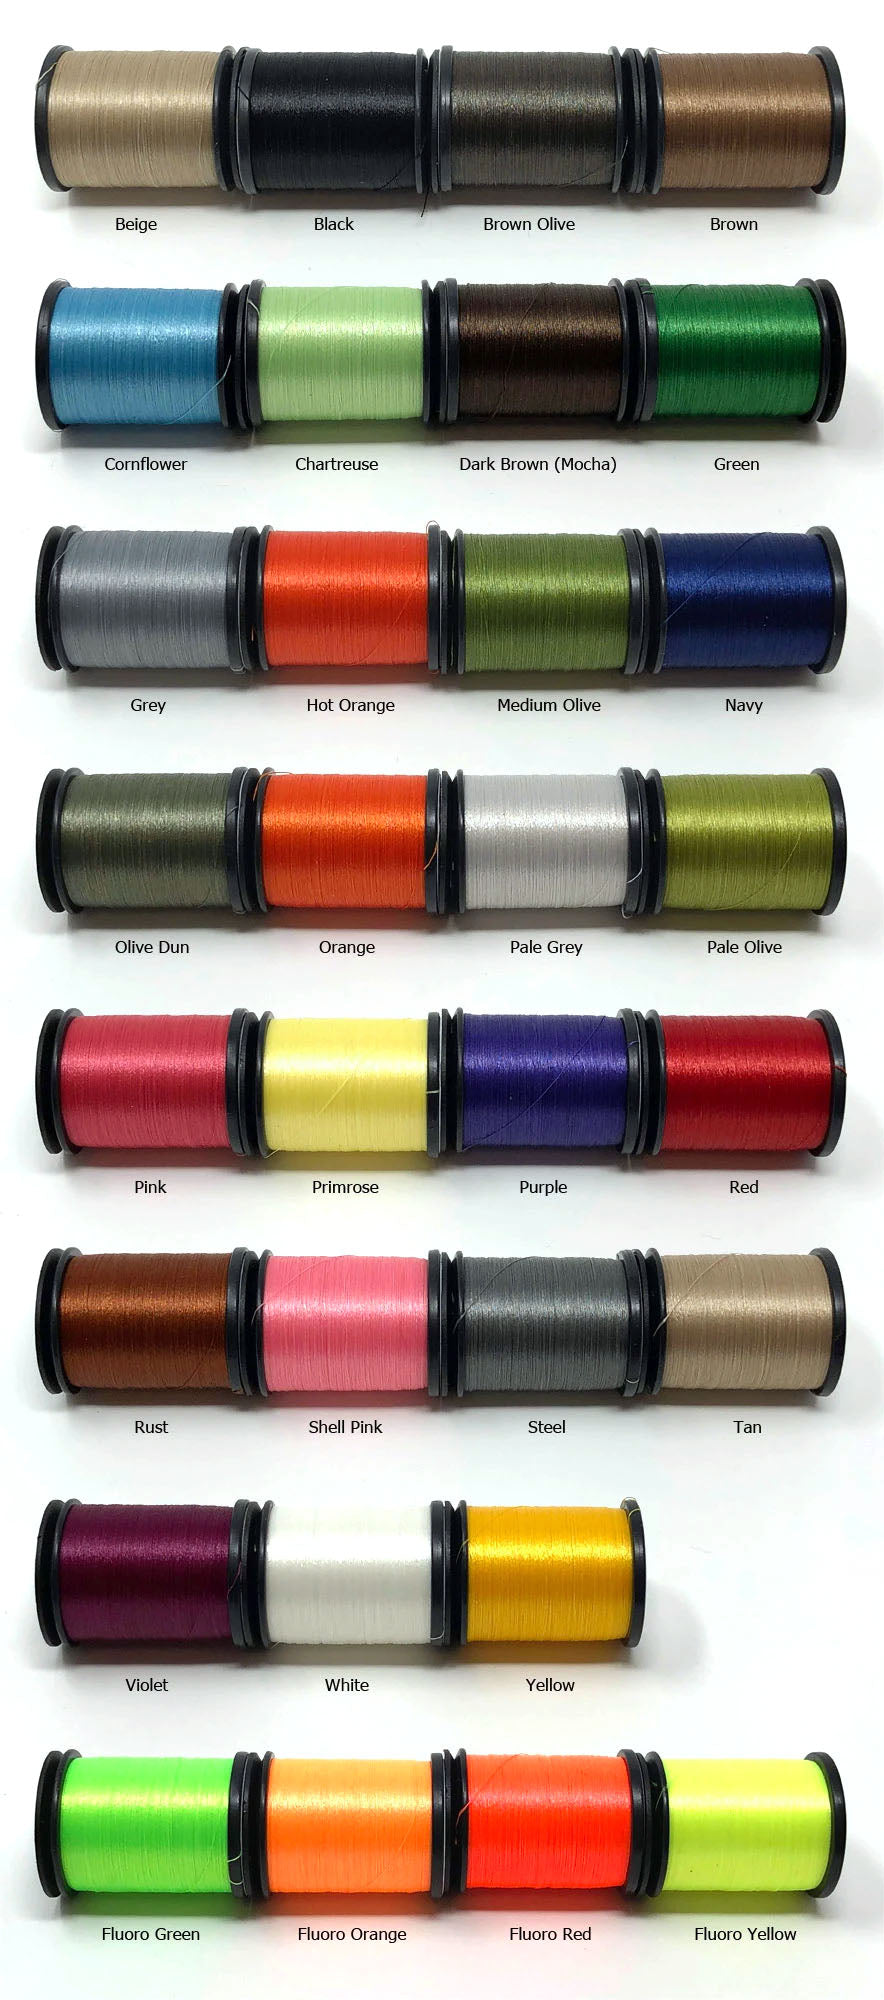 Image of the different colors available for Semperfli Classic Waxed Thread.